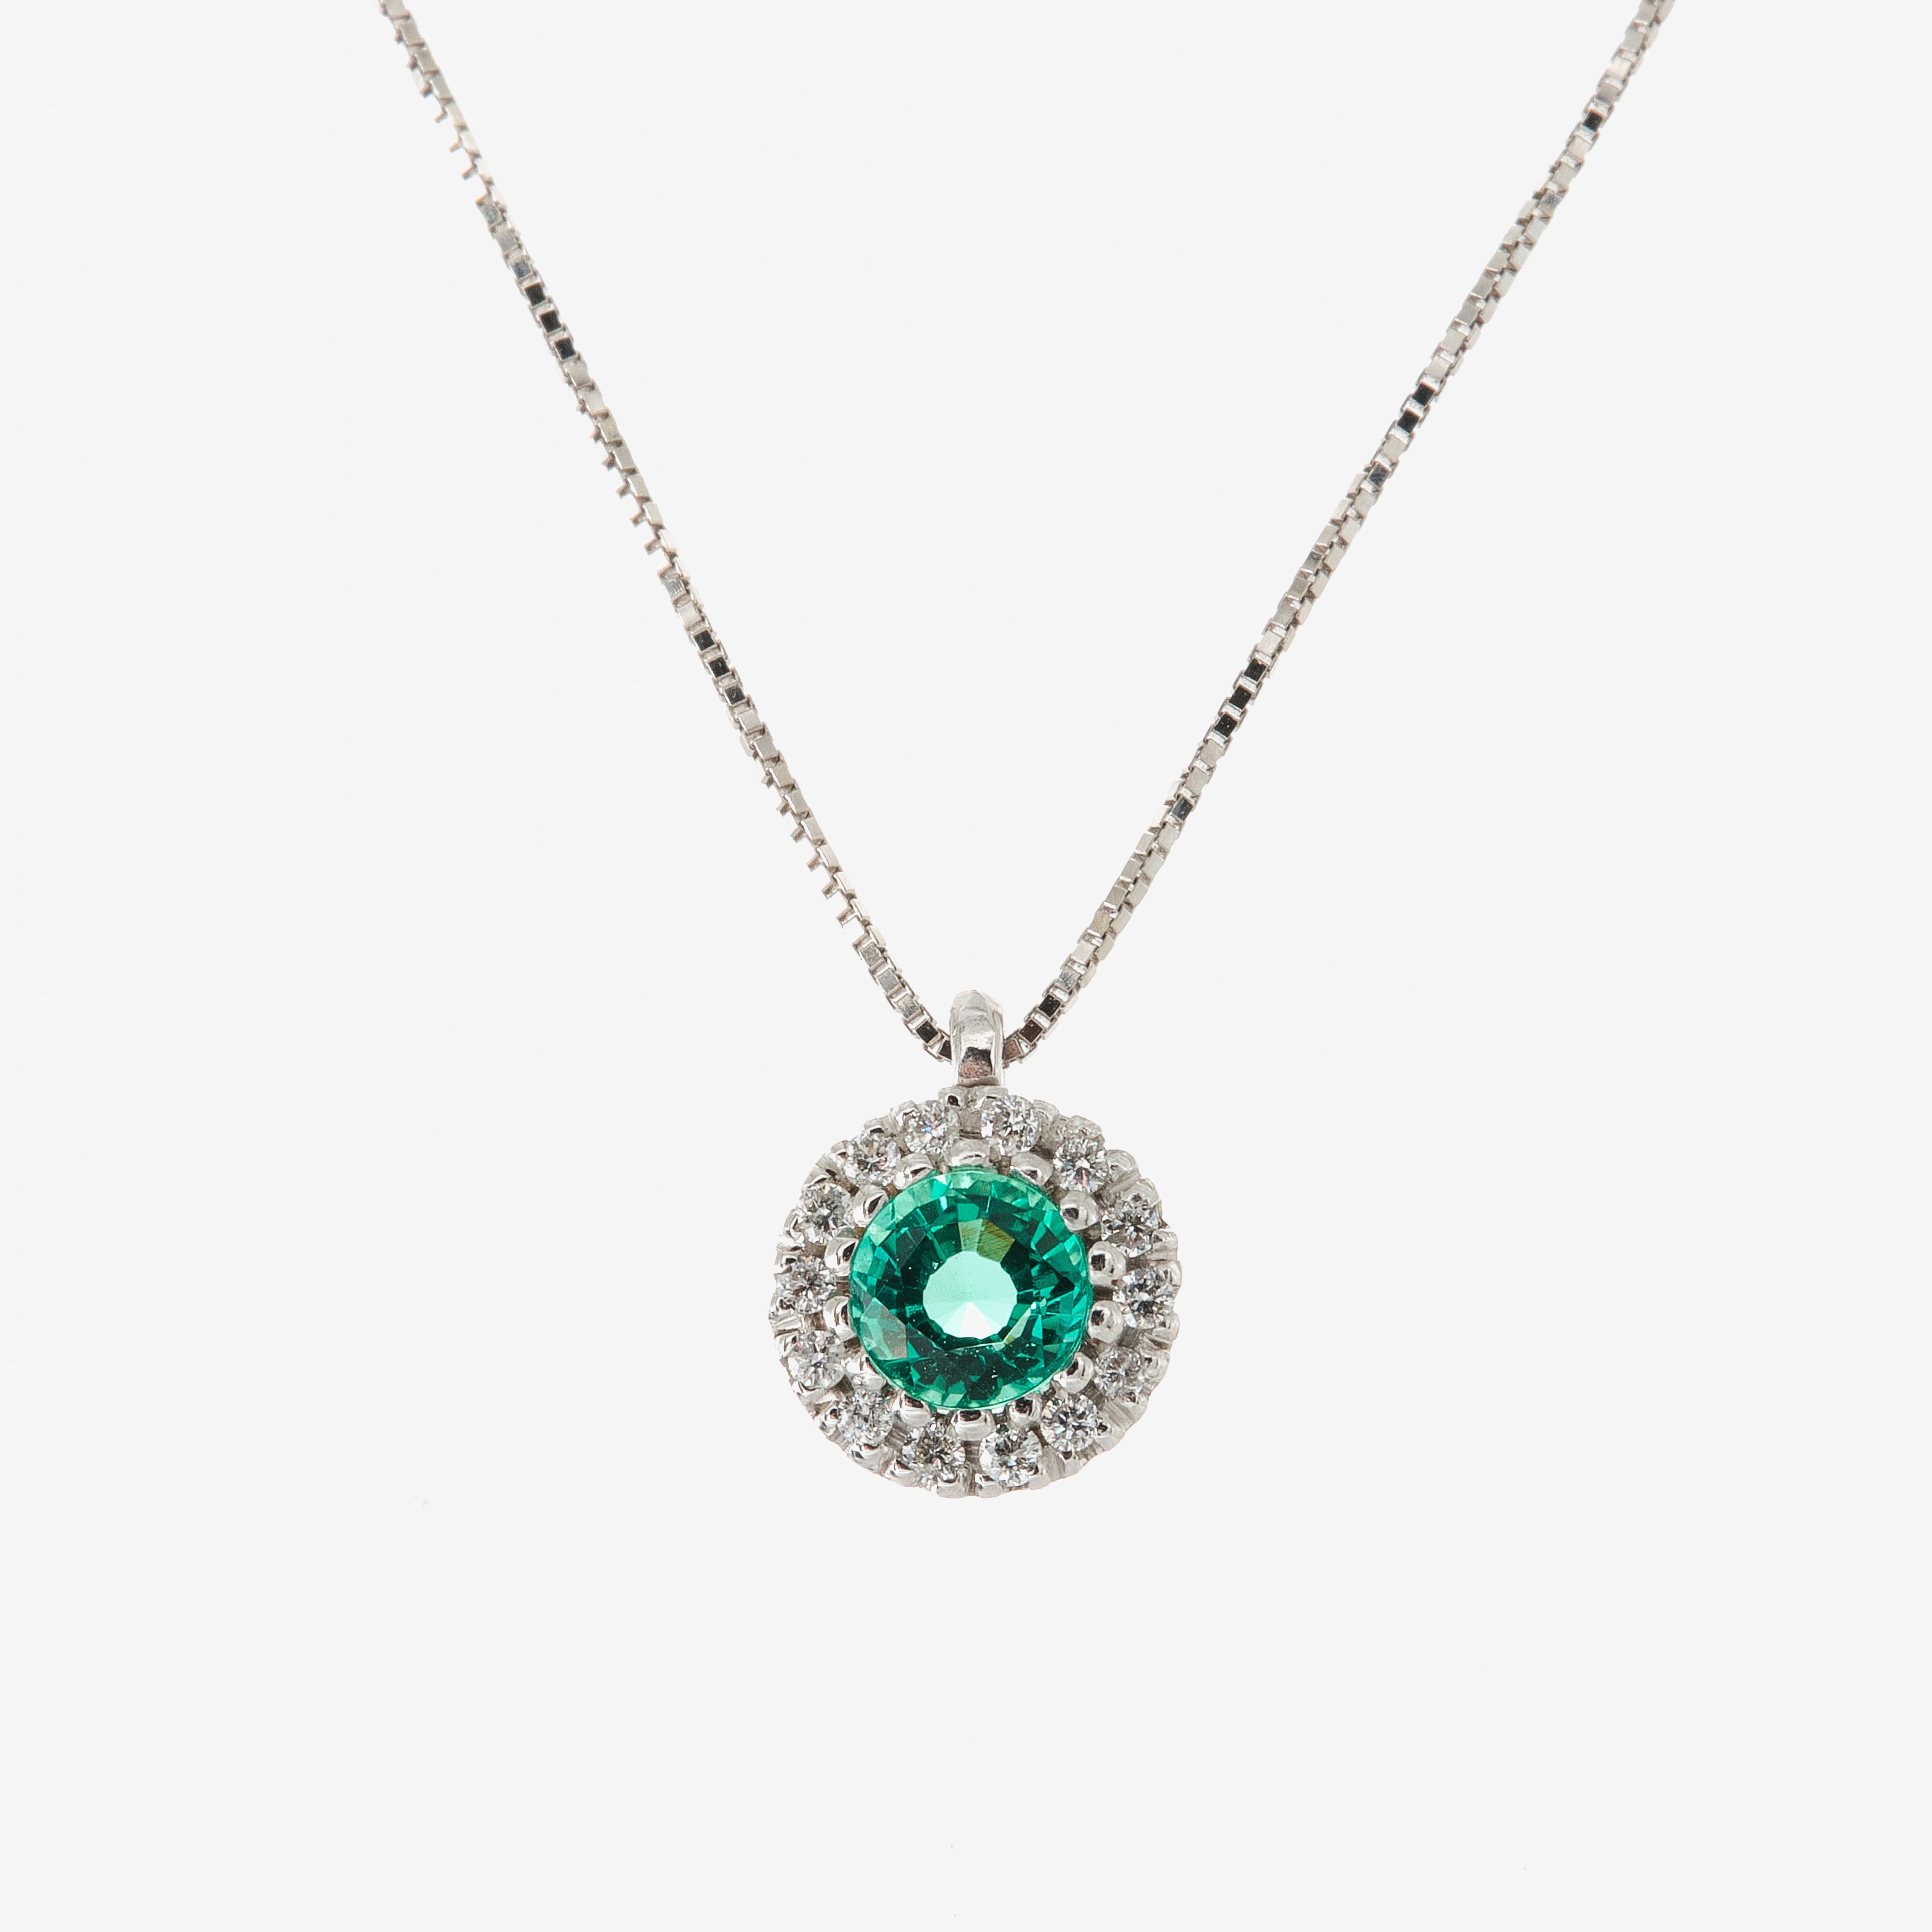 Round necklace with emerald and diamonds